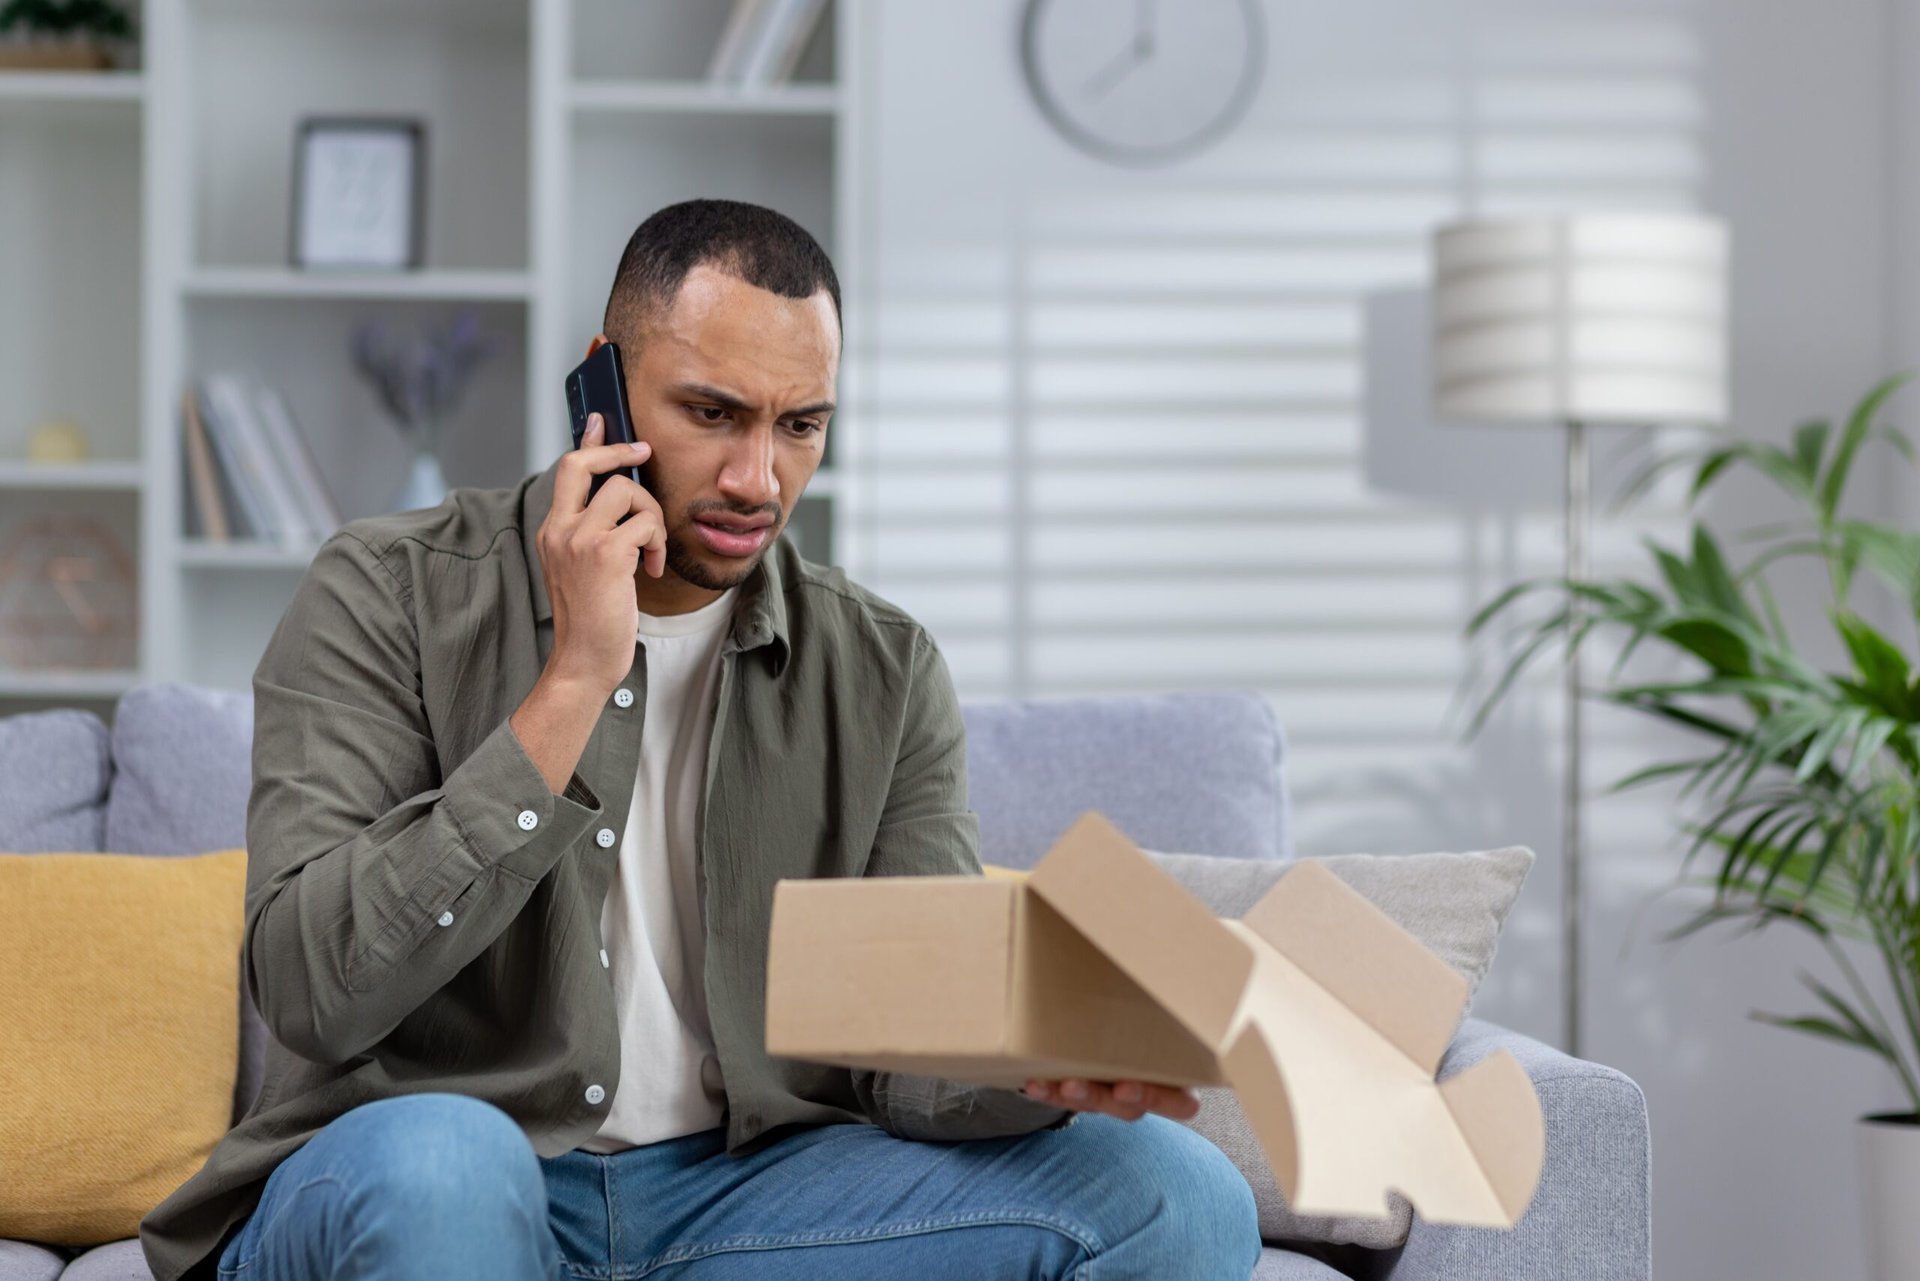 Man frustrated with online purchase looking disappointed and on the phone with customer service